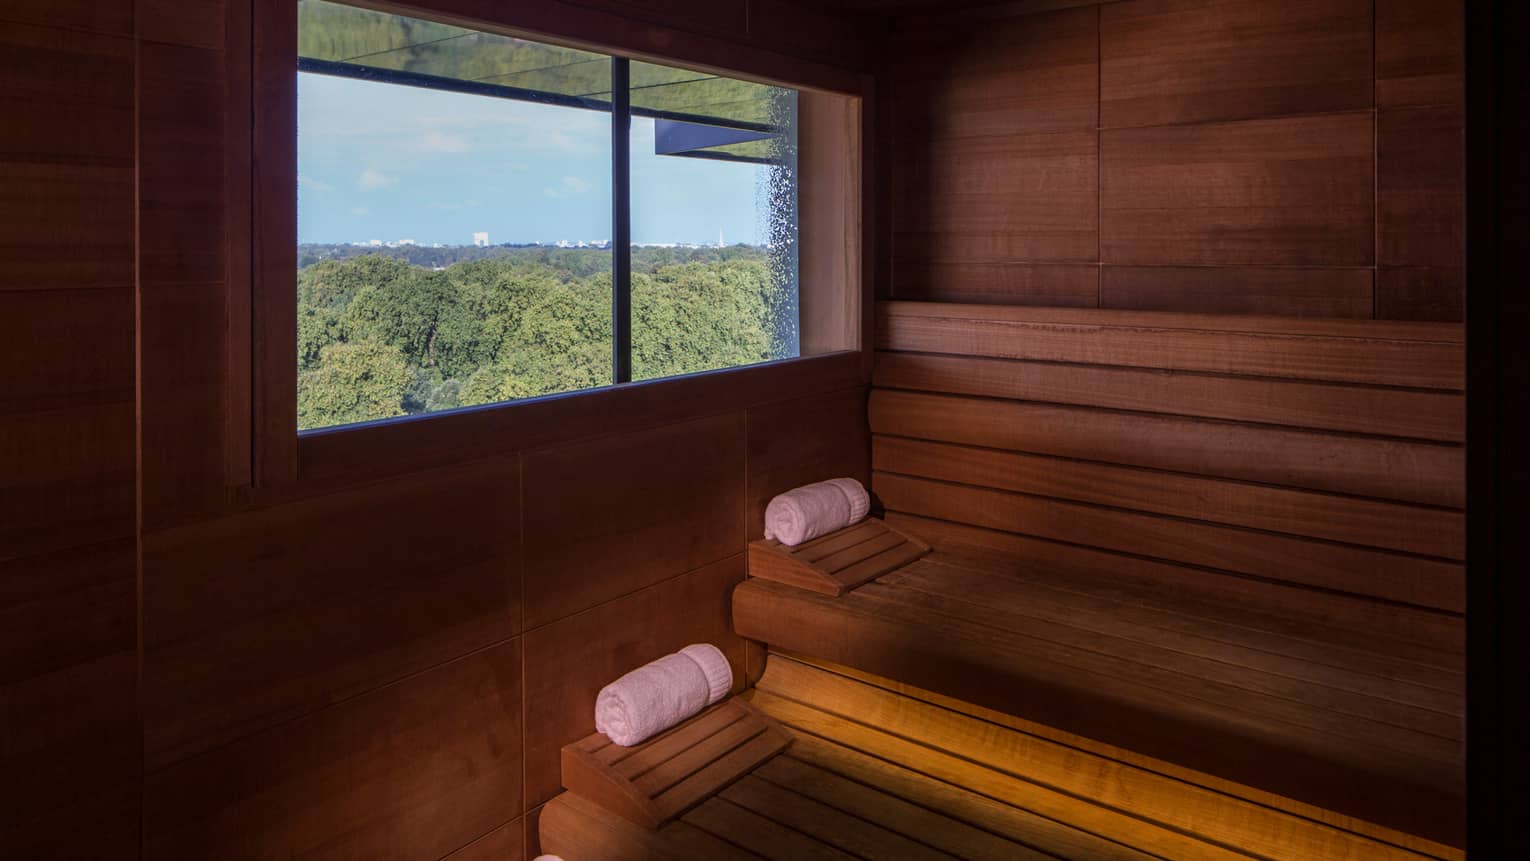 Rolled white towels on benches in wood sauna, window looking out over trees